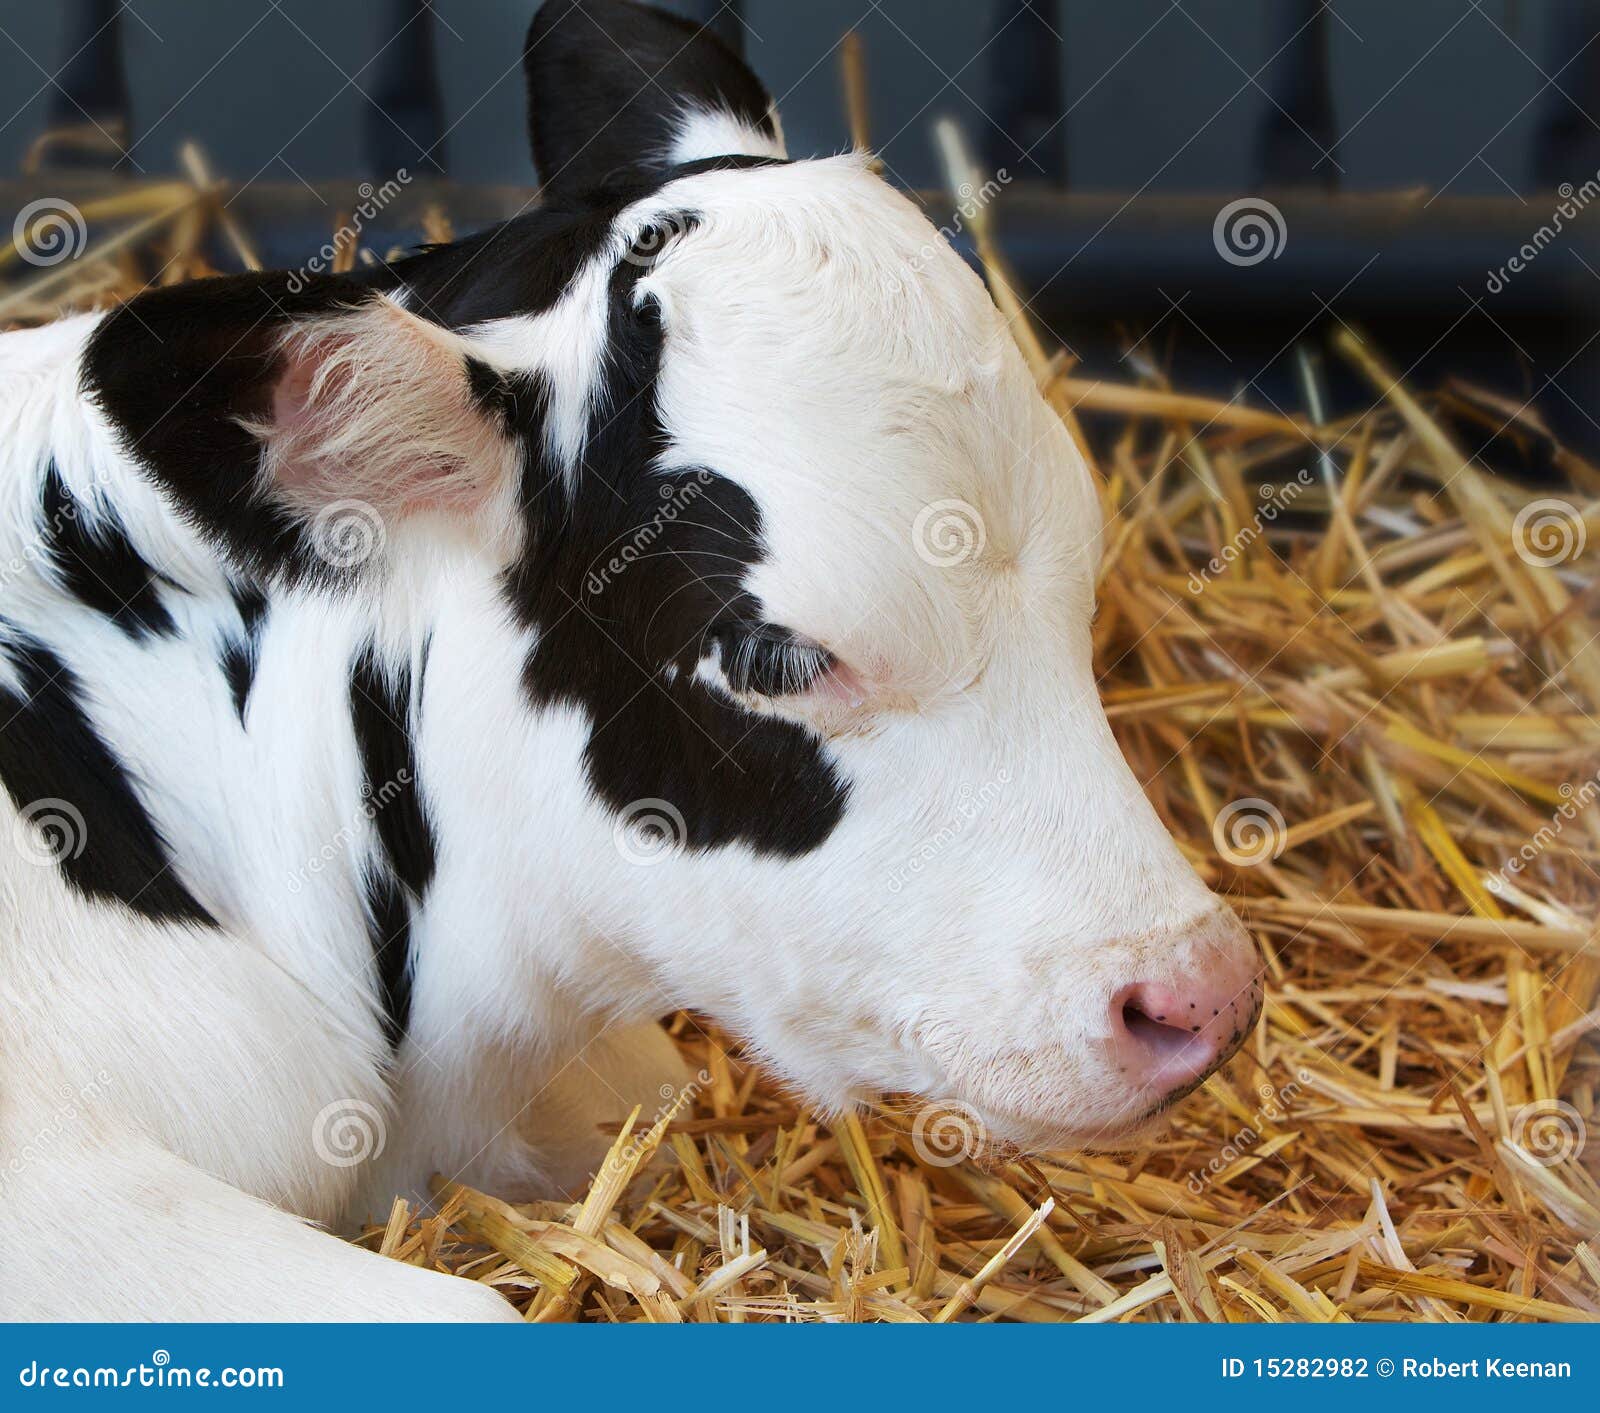 1,820 Jersey Cow Calf Stock Photos - Free & Royalty-Free Stock Photos from  Dreamstime